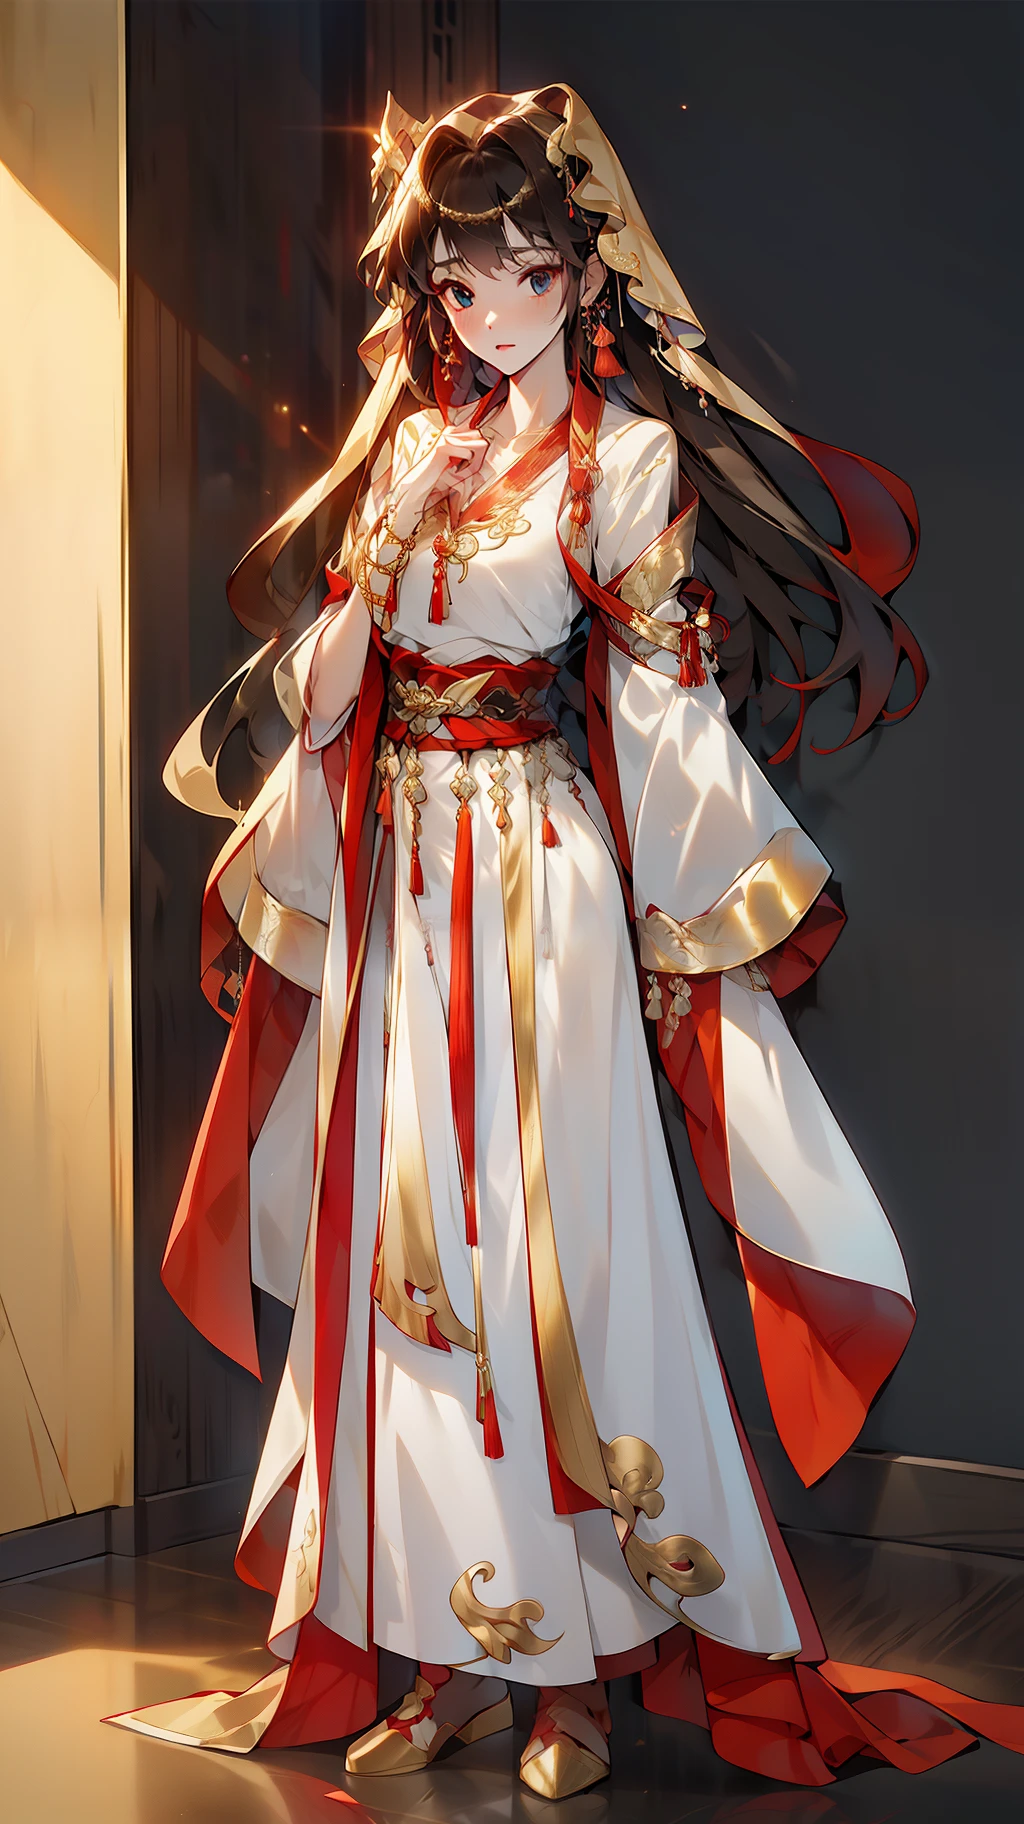 （NOhumans：1.5），（clothing design）， tmasterpiece， Ultimate，（a color），Ancient Chinese clothes，Western Regions clothing，gossamer，gold chains，red color Hanfu，Phnom Penh embroidery，gameicon，